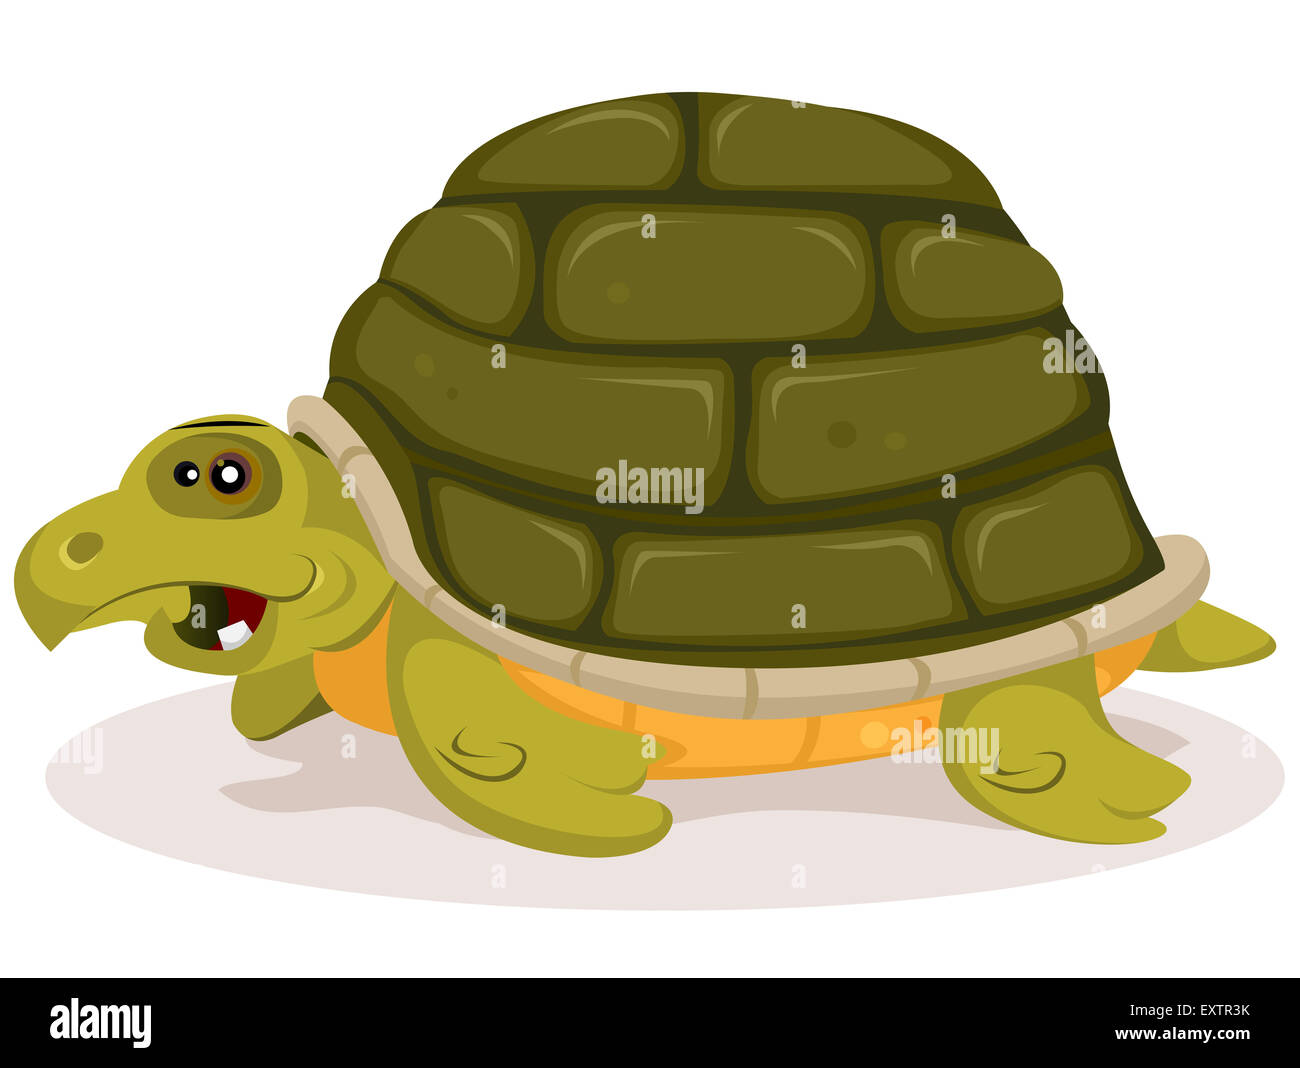 Illustration of a funny happy and cute cartoon green tortoise character with home shell on her back Stock Photo